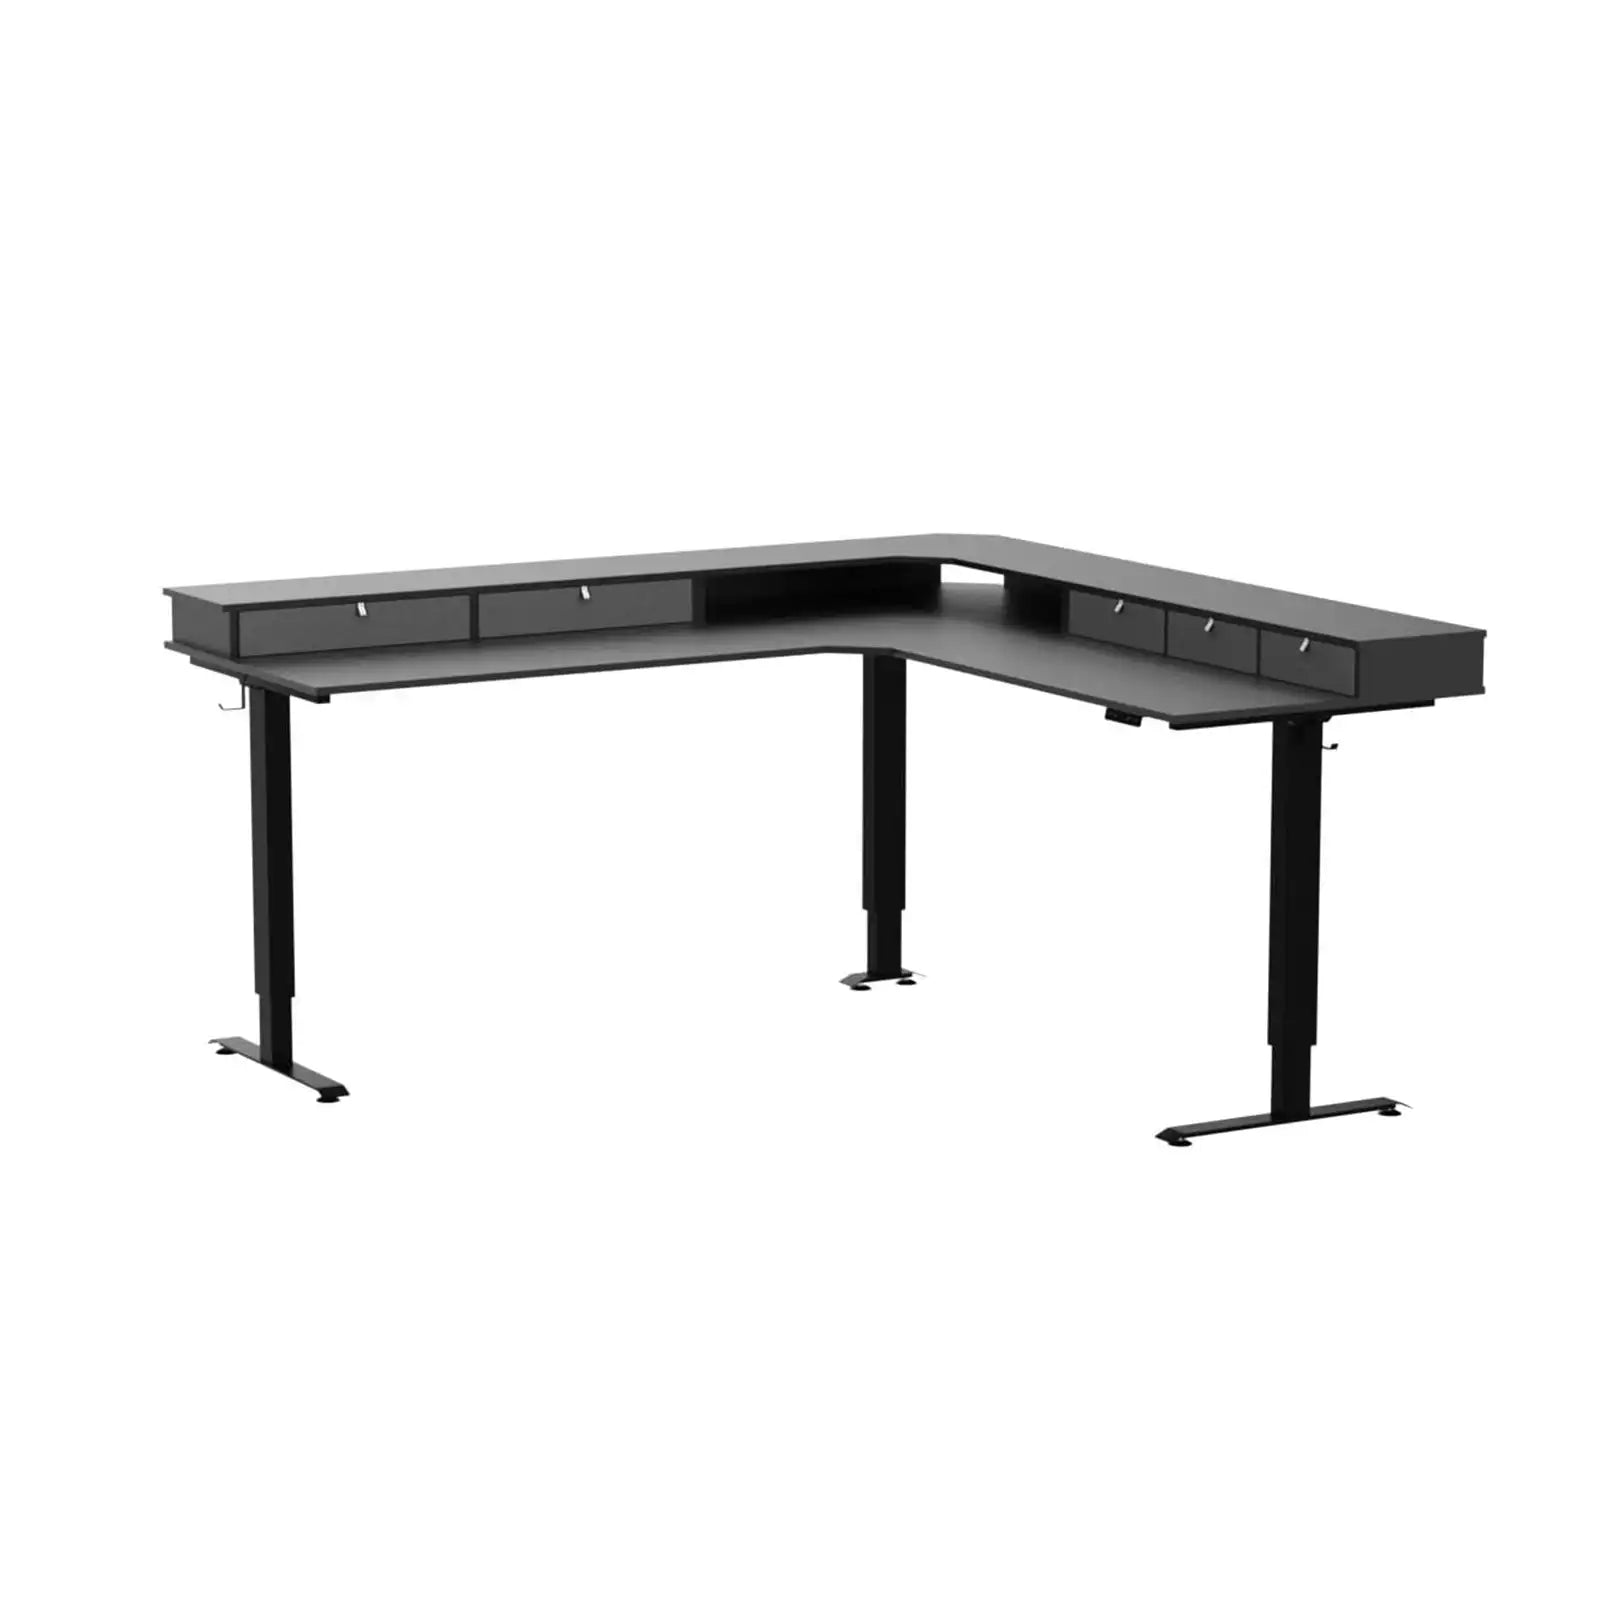 Triple Motor 75" L Shaped Standing Desk with 5 Drawers, Reversible Electric Standing Gaming Desk Adjustable Height, Corner Stand up Desk with Splice Board